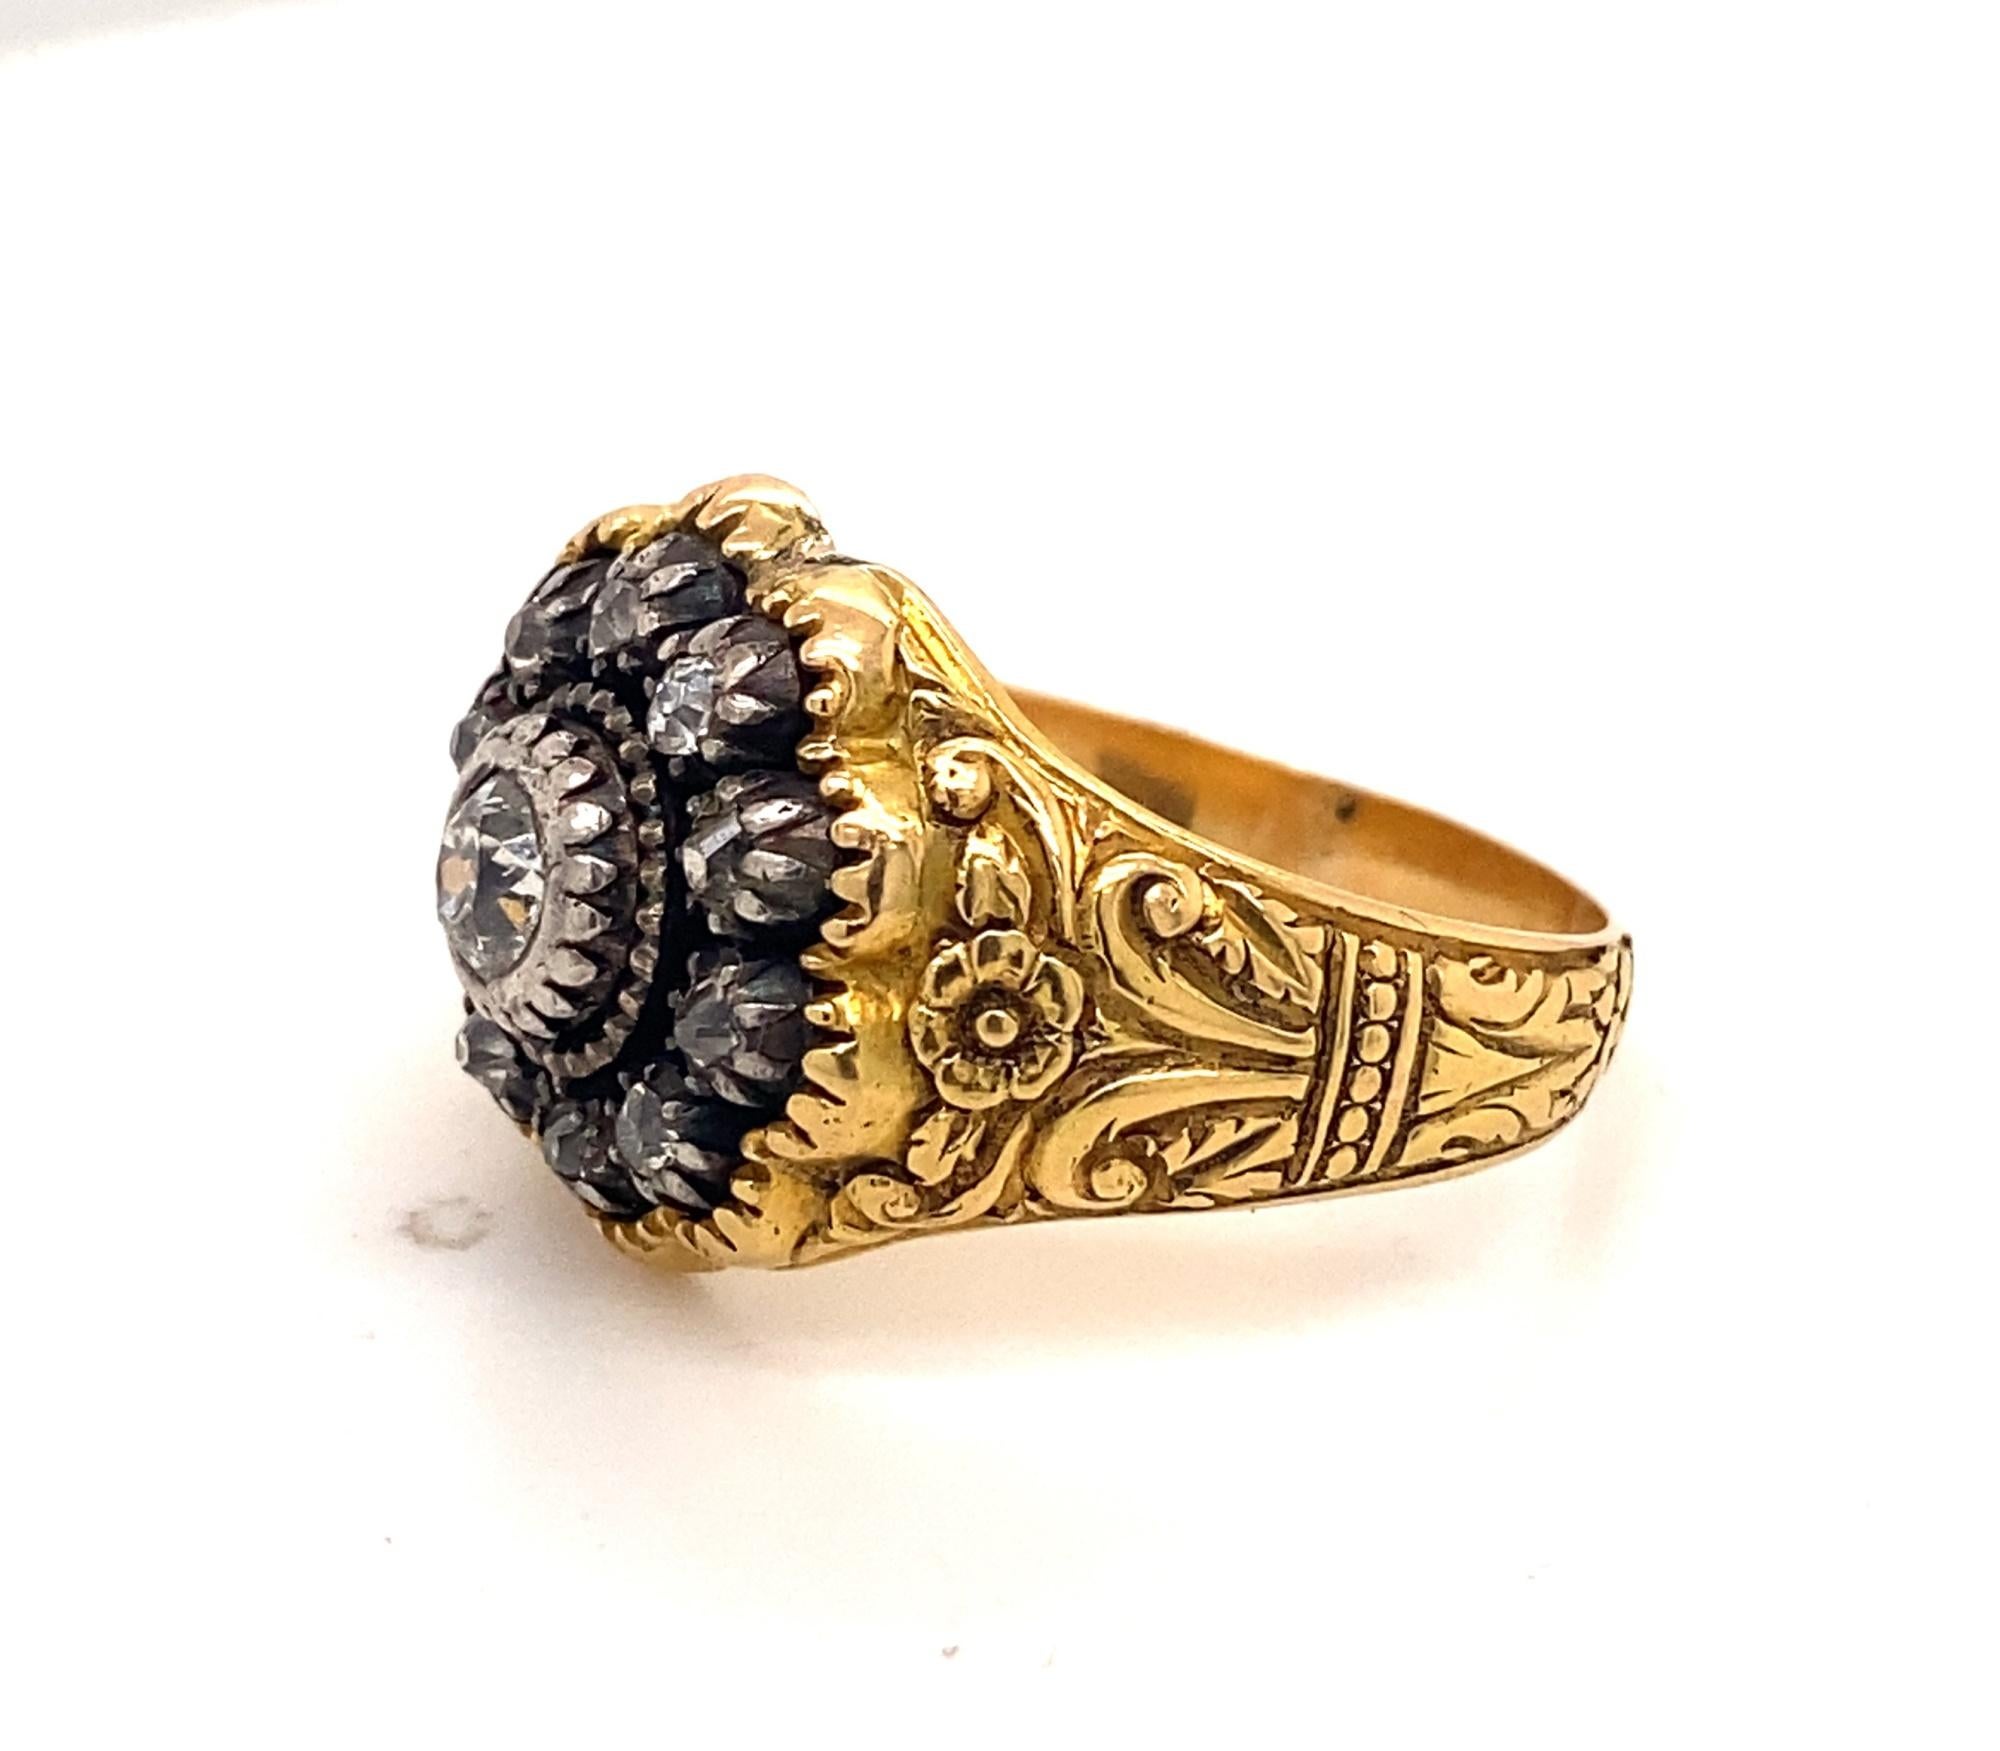 This is a stunning antique late Victorian c.1910 Men’s ring with floral Art Nouveau designs on the side.  The ring is set with a .50 carat old mine cushion cut and 10 rose cut diamonds set in platinum.  The floral and scroll work is finely detailed.